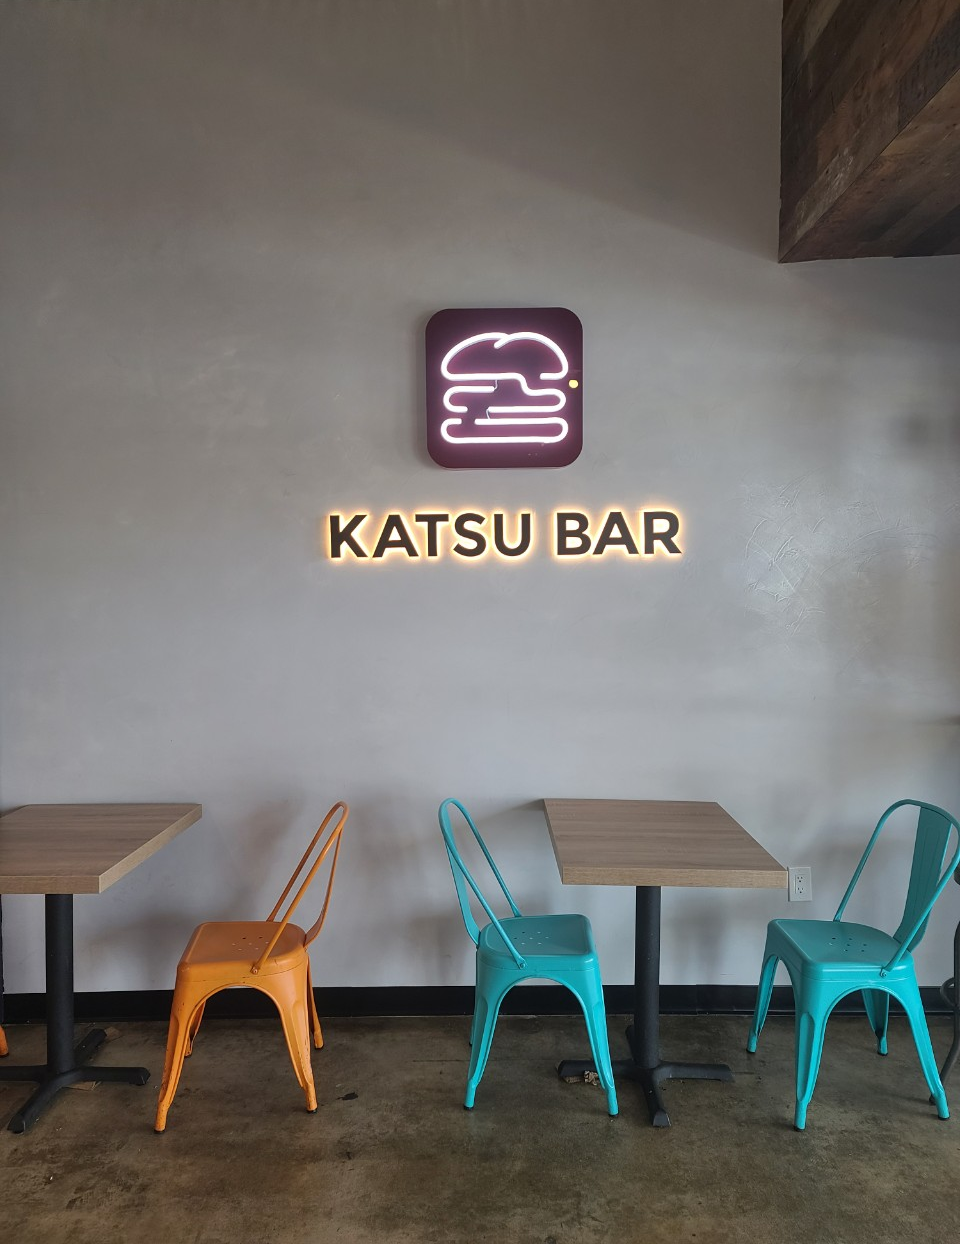 Katsu Bar with sign in background